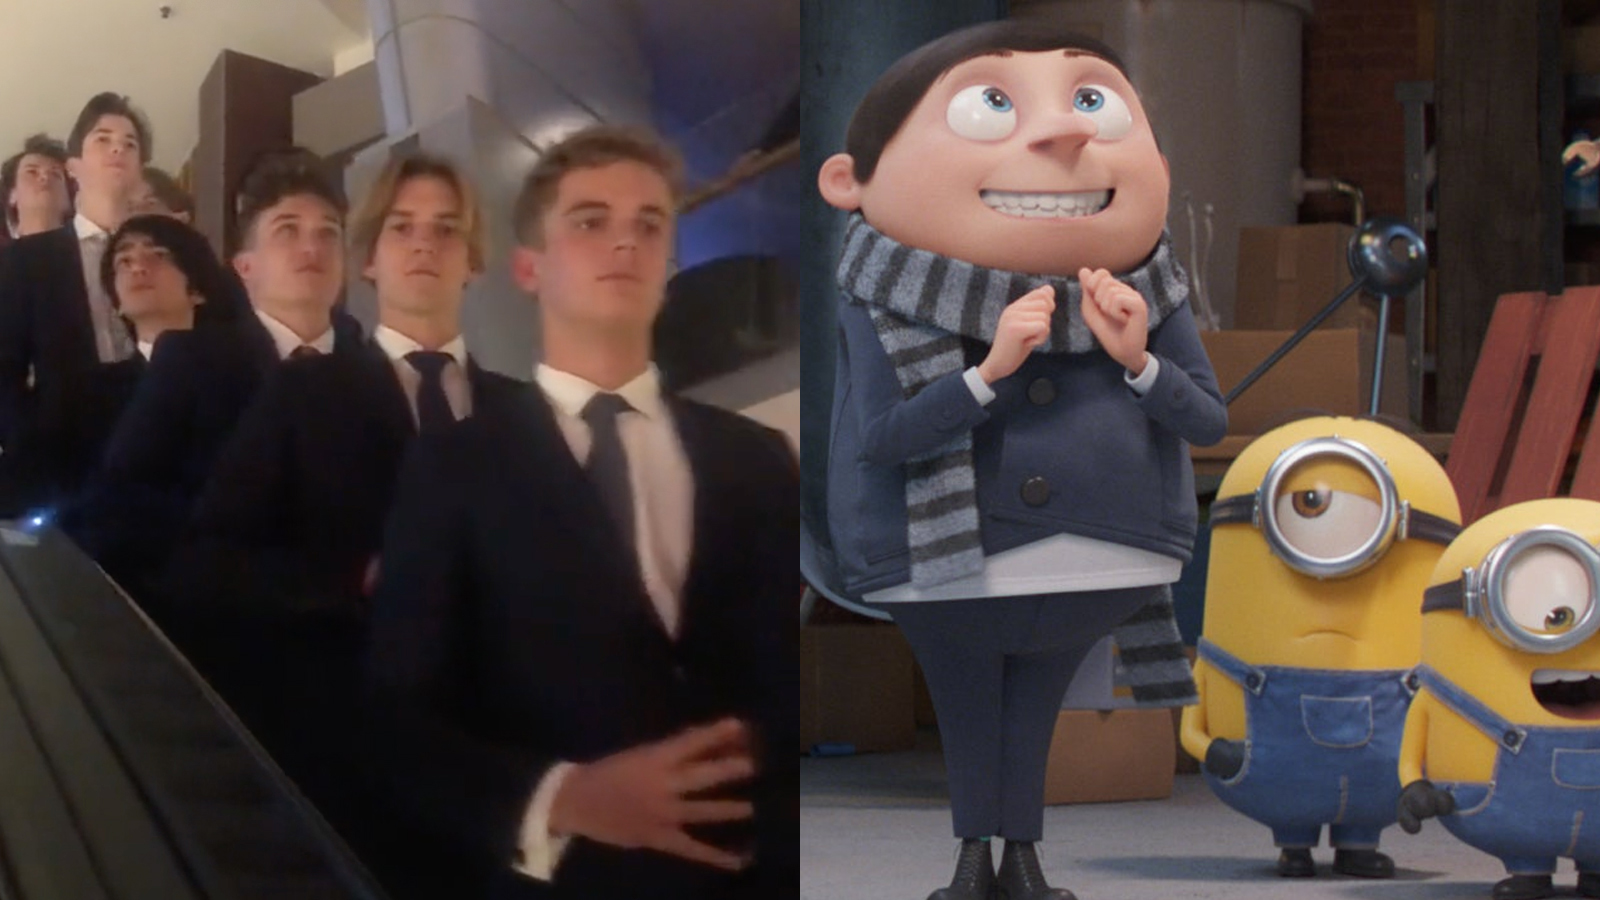 The 'GentleMinions' Trend Proves Hollywood Is Completely Out Of Touch